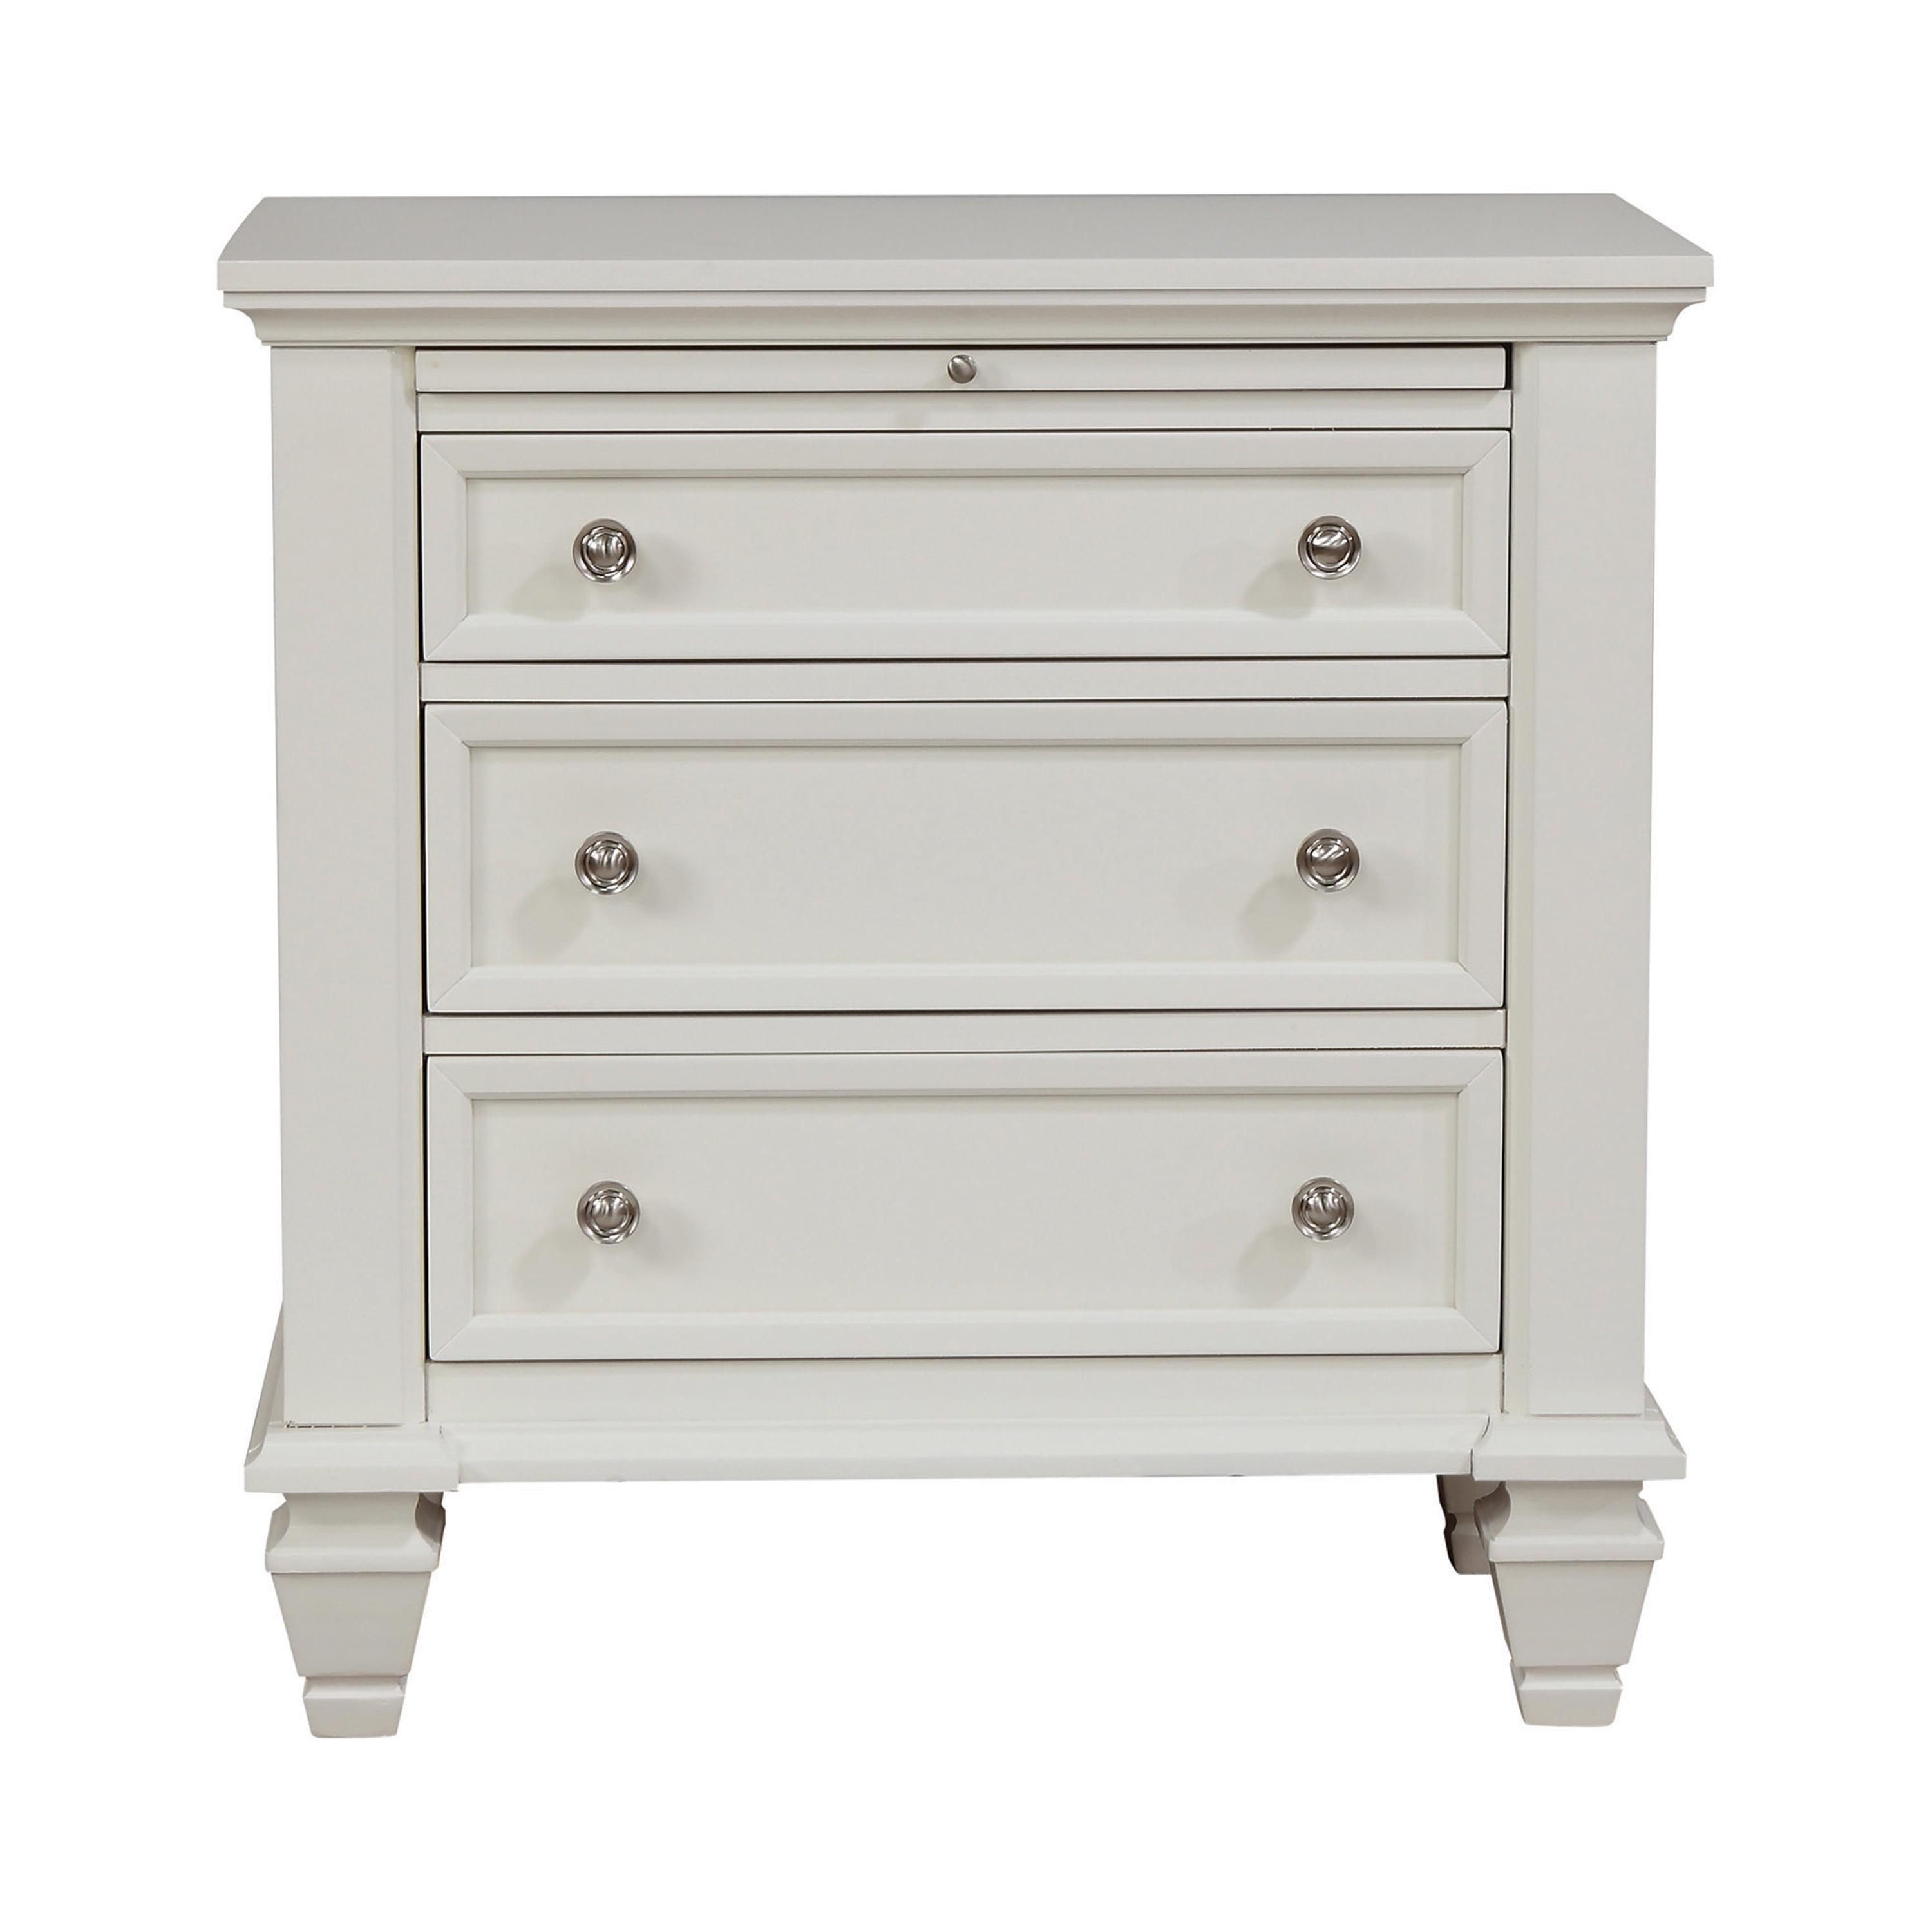 Coastal White Transitional 3-Drawer Nightstand with Pull-Out Tray